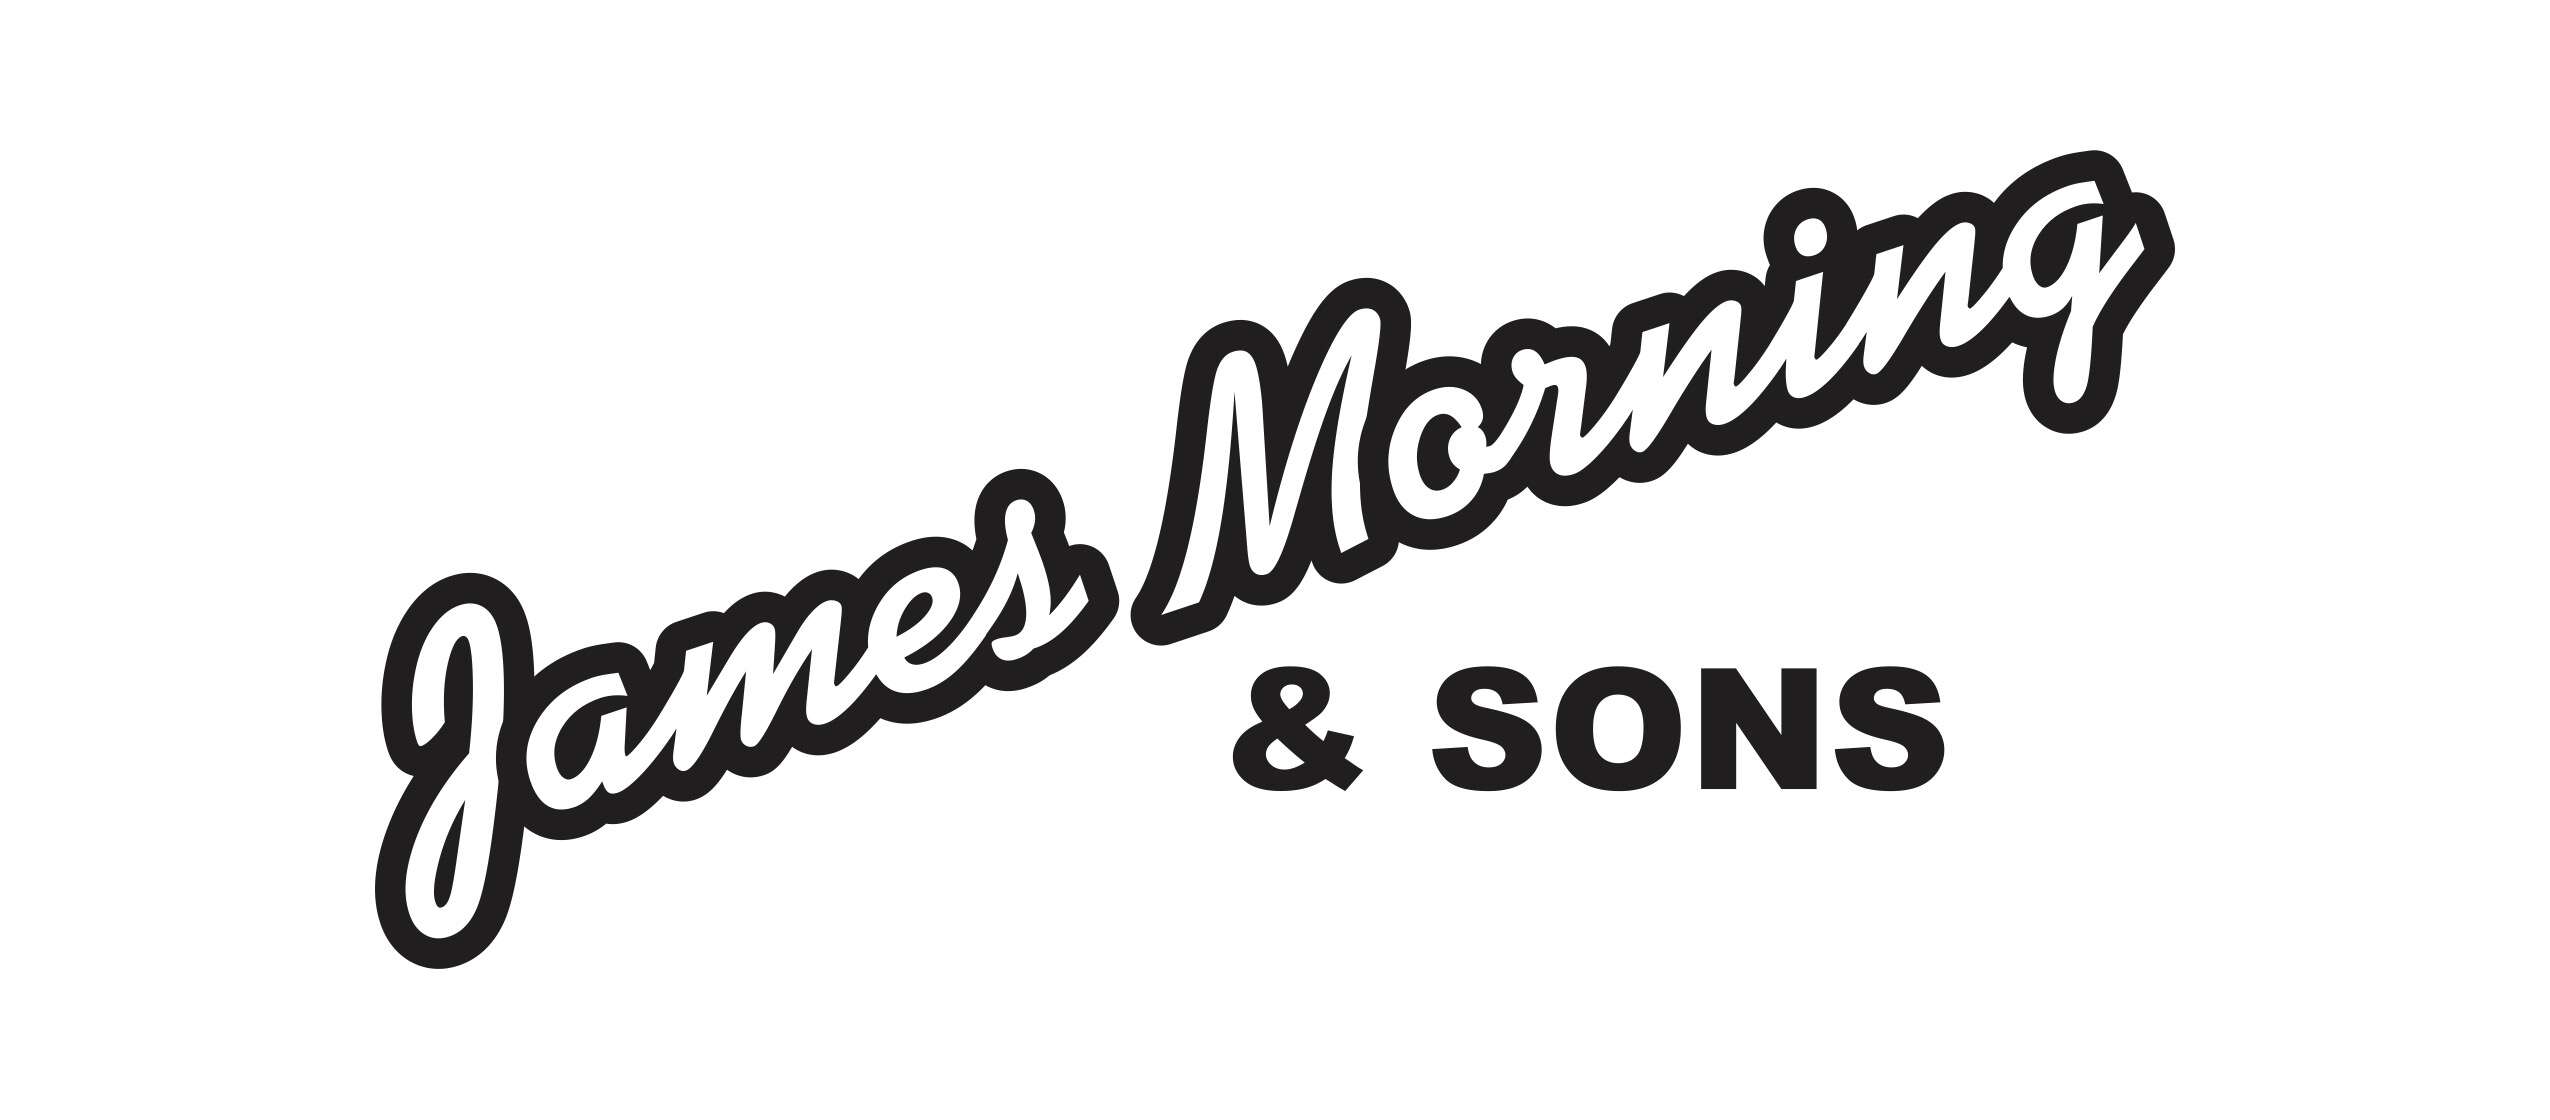 James Morning & Sons